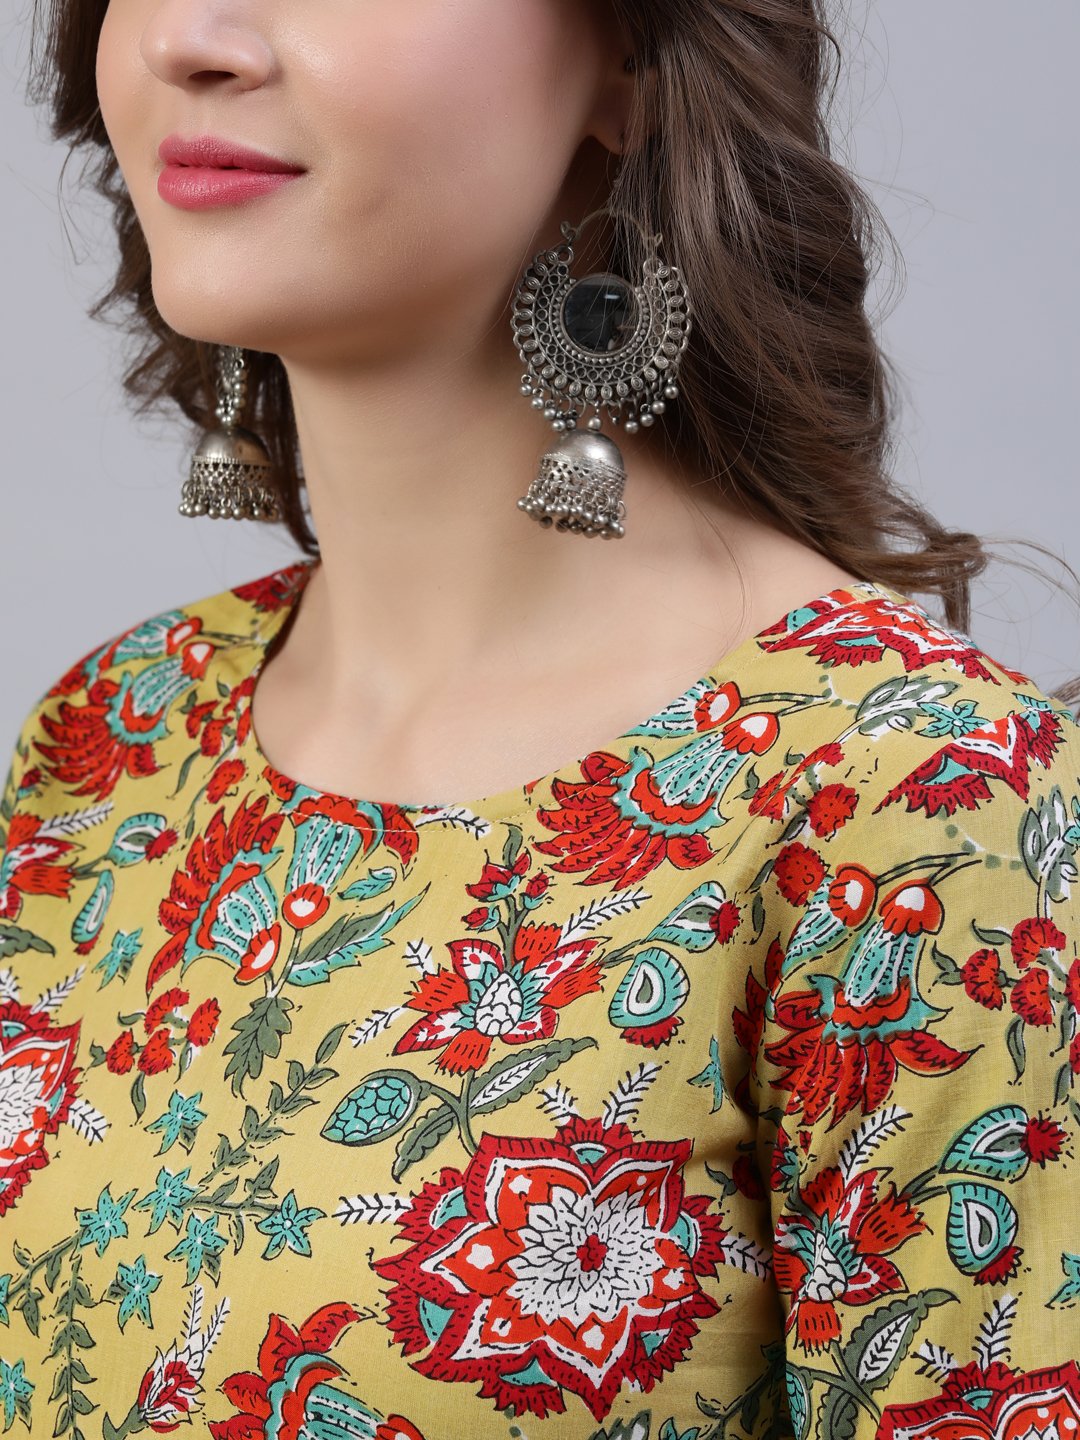 Women's Green Floral Printed Dress With Dupatta - Nayo Clothing